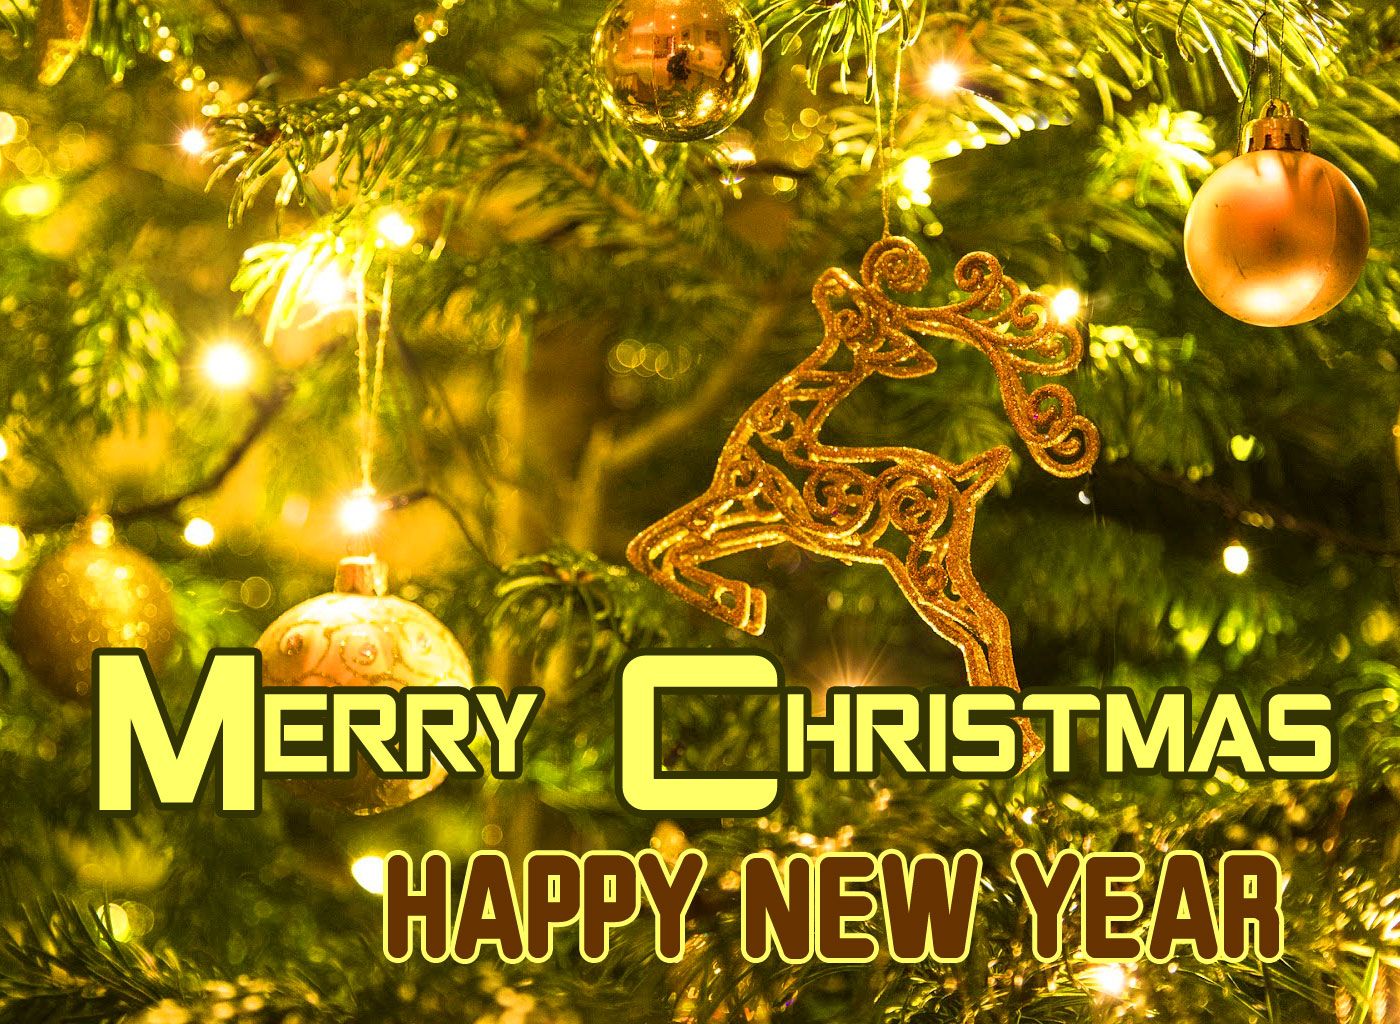 Snowman Merry Christmas and Happy New Year Image Morning Image